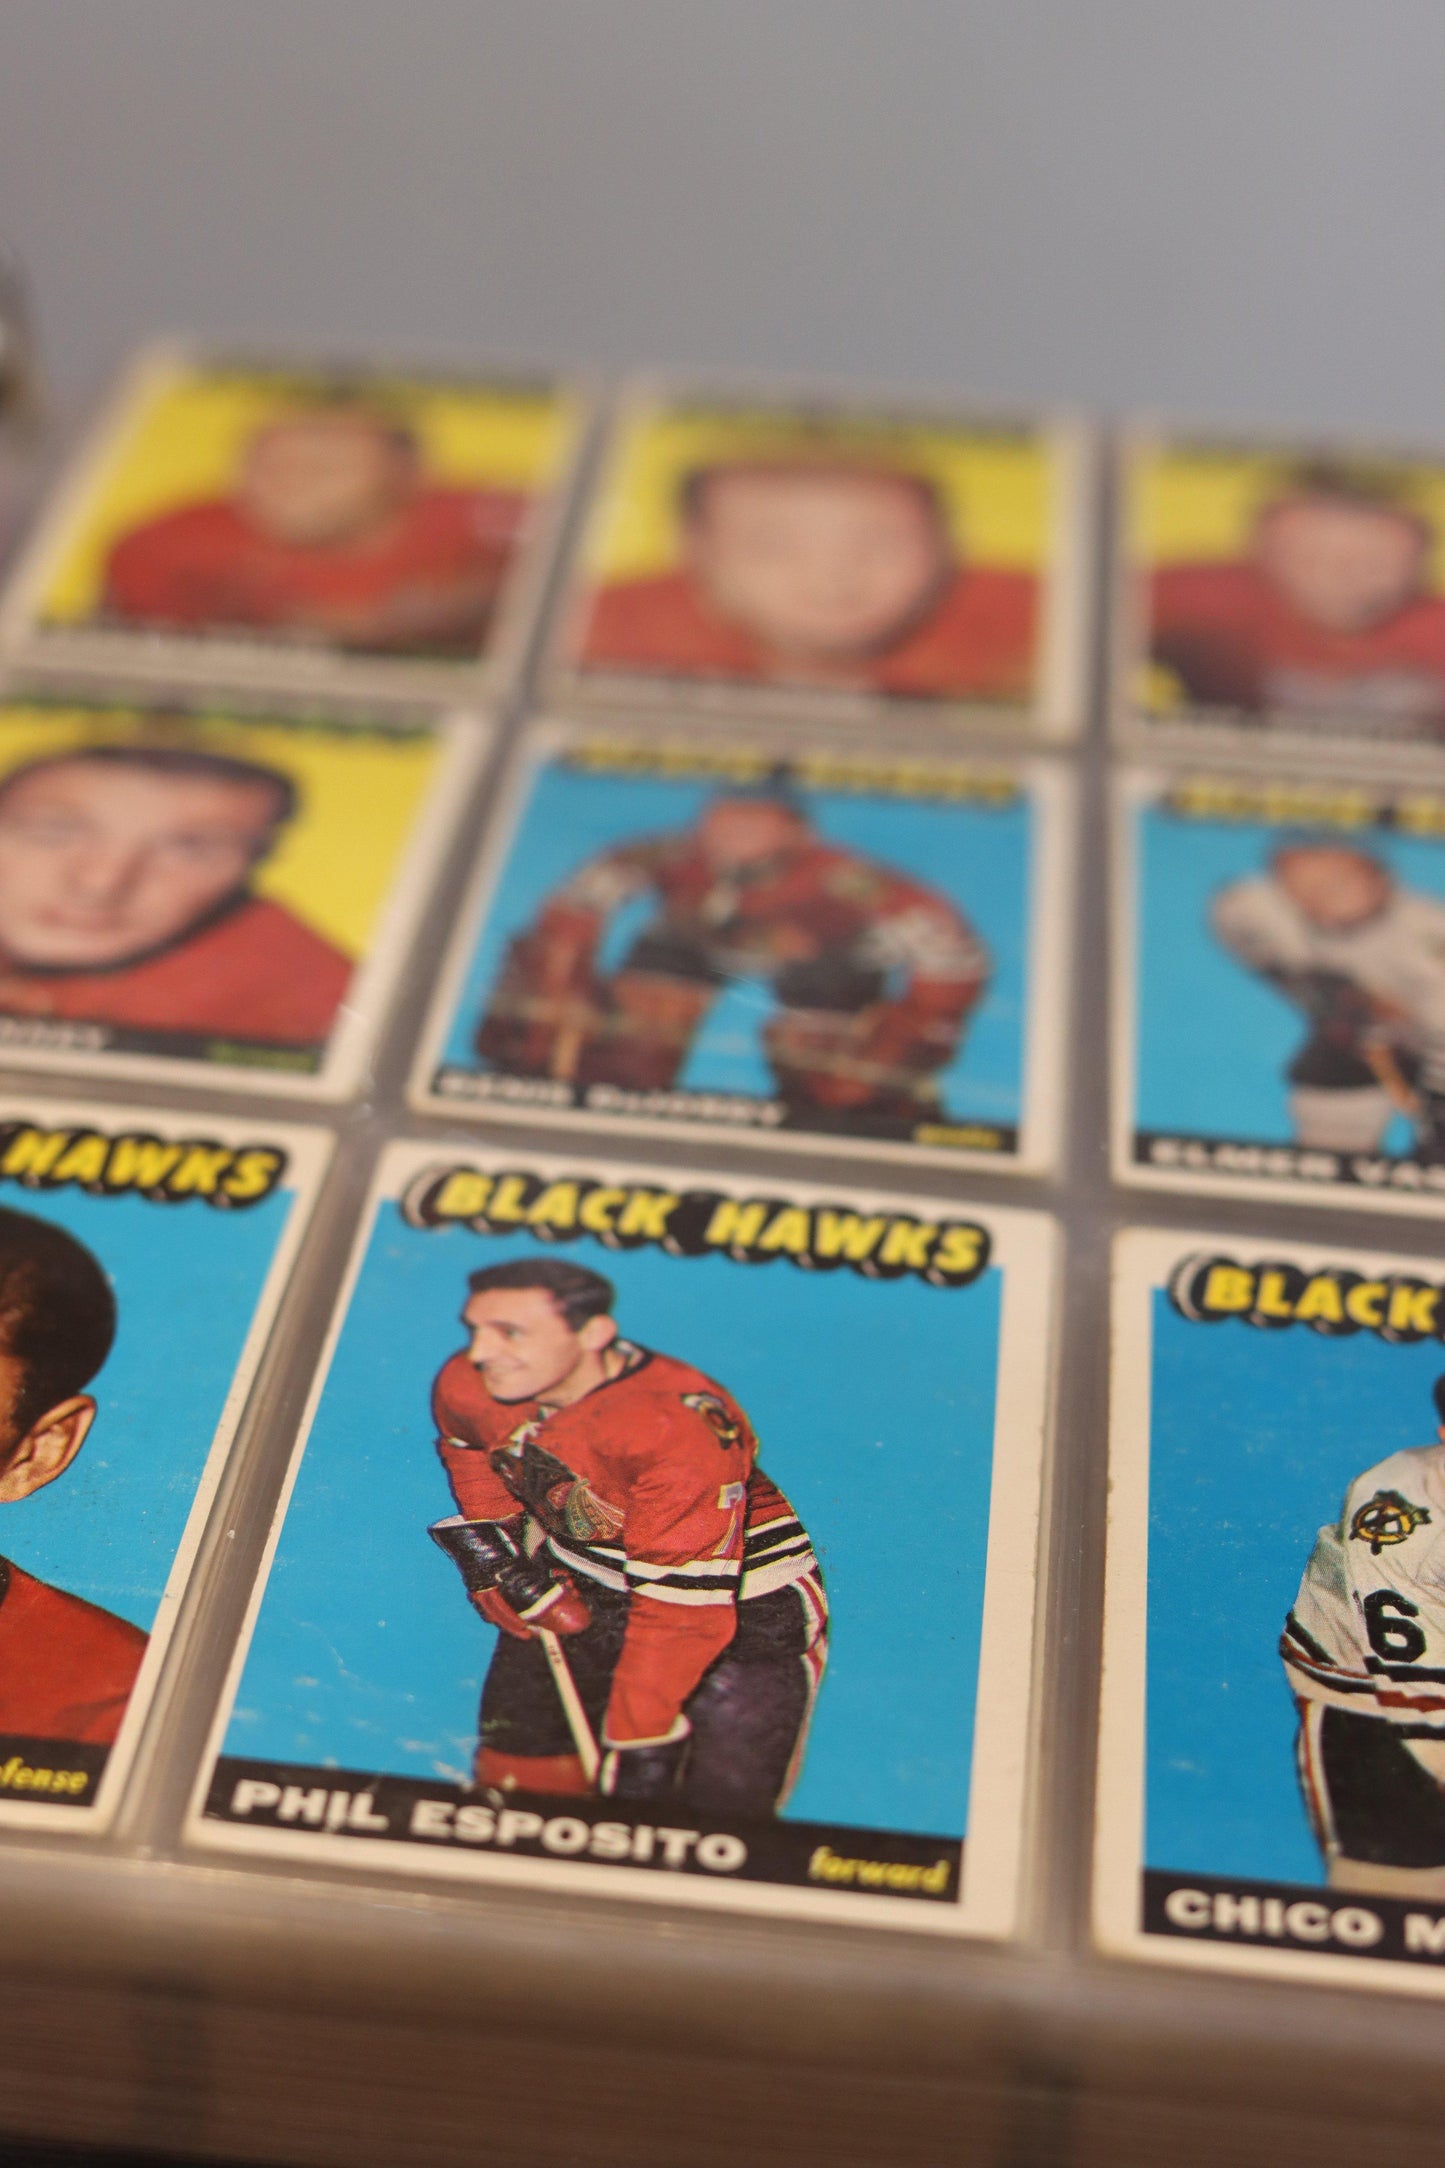 1965/66 Topps Hockey Card Complete Set - FLIP Collectibles Shop